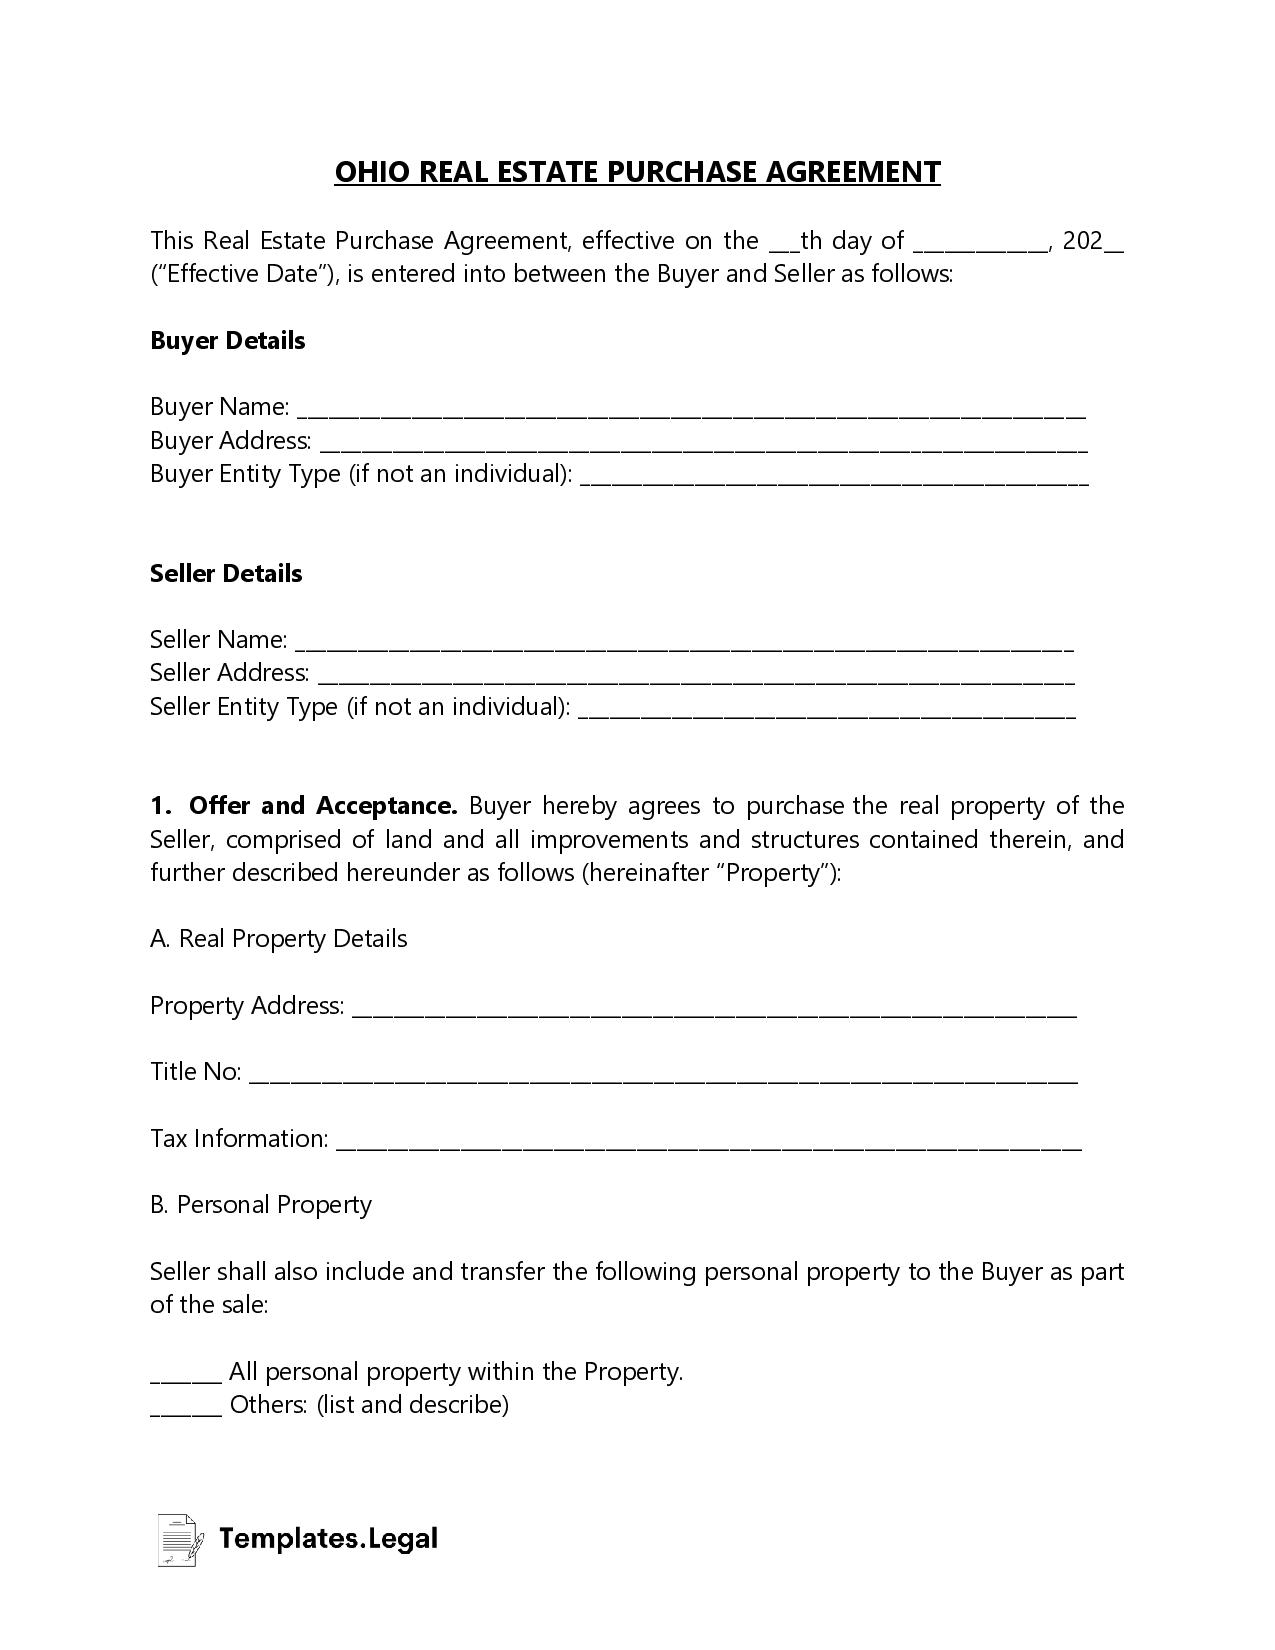 Ohio Real Estate Purchase Agreement - Templates.Legal